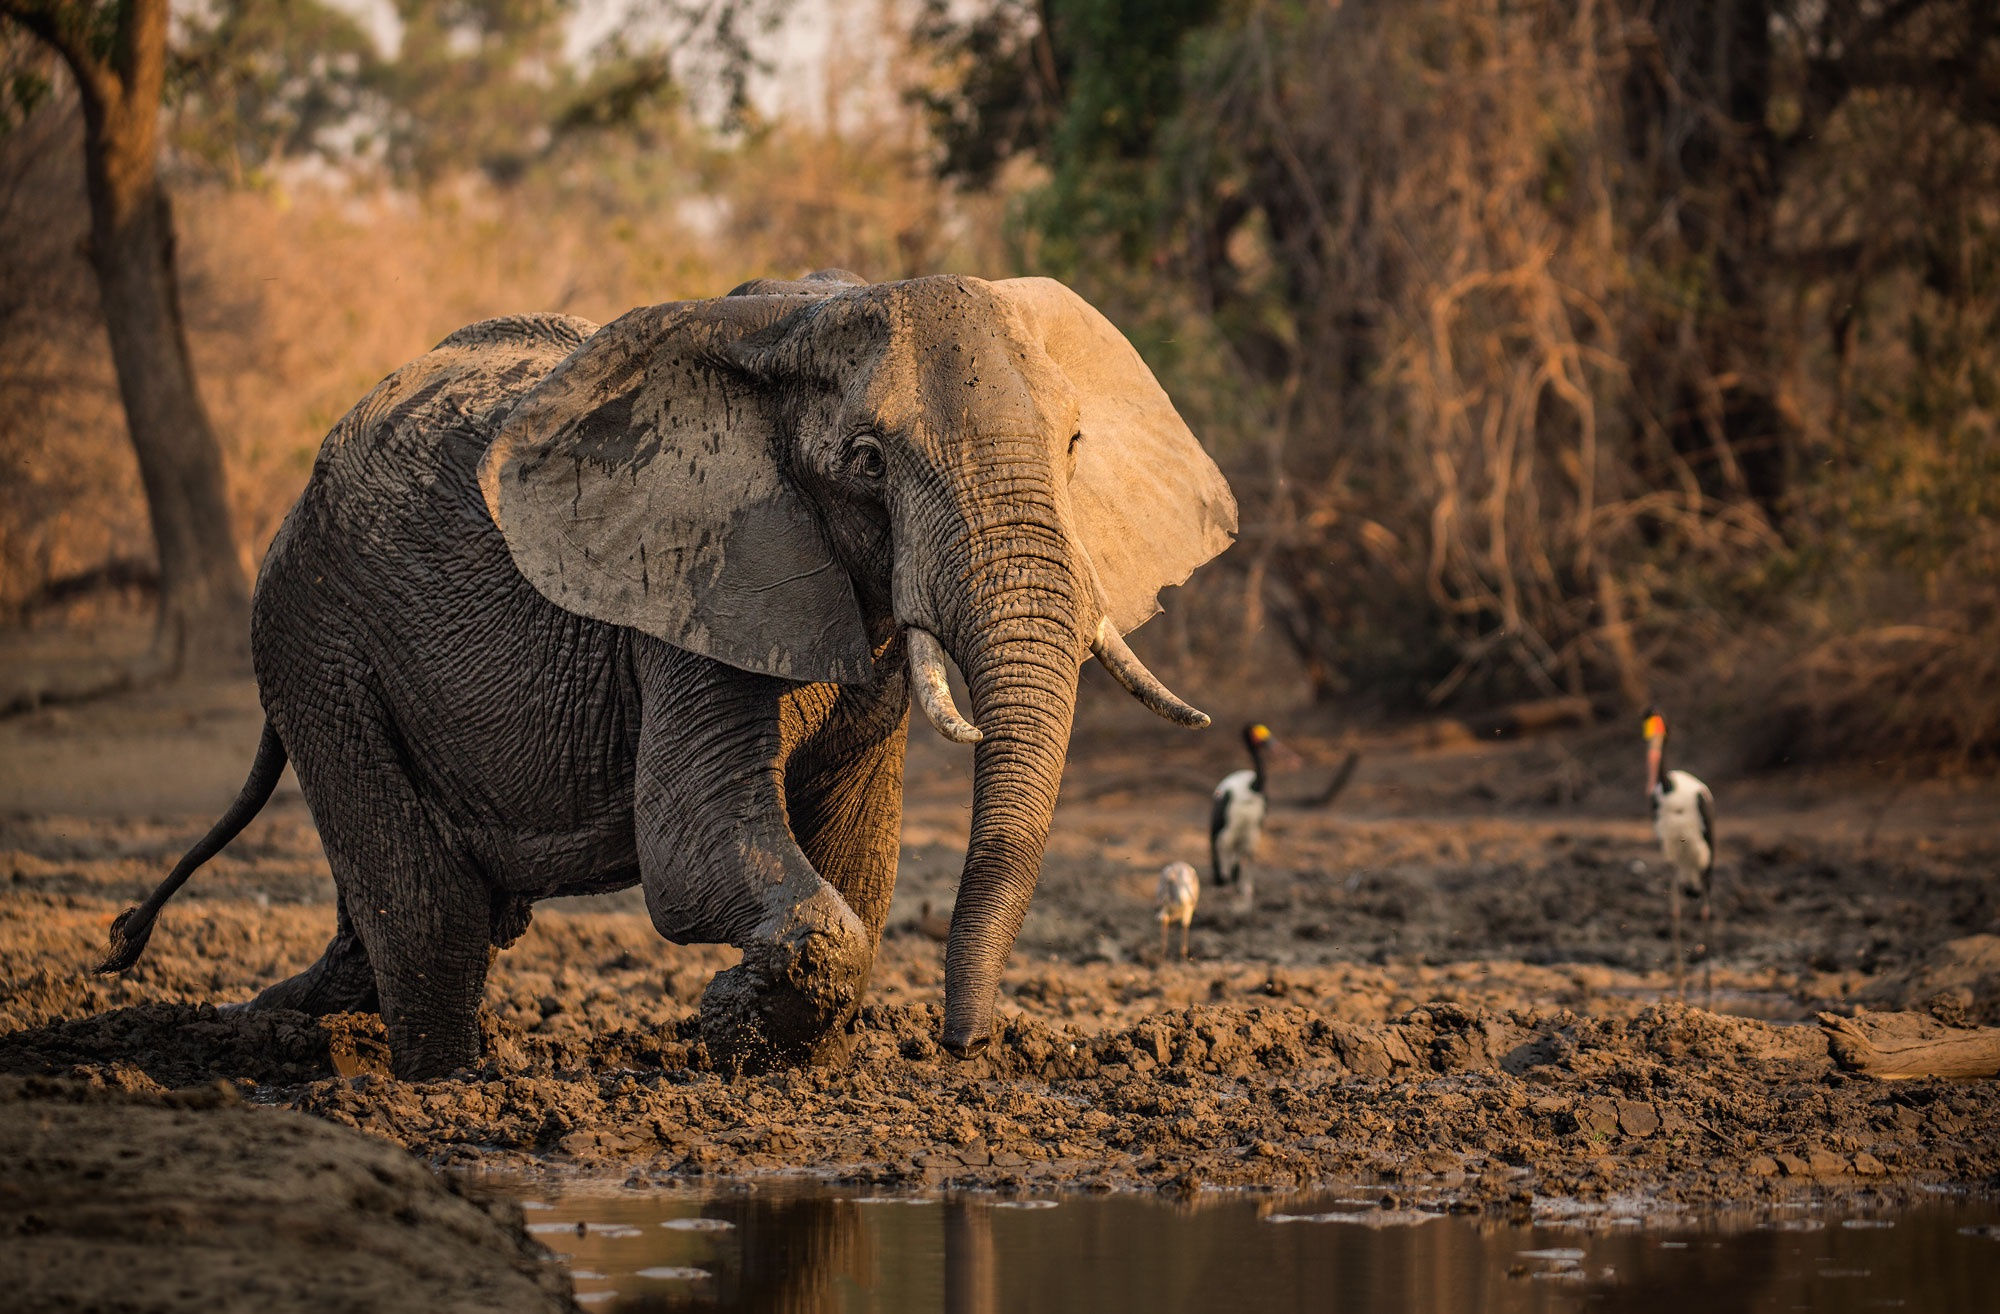 Elephant walking through deep mud by Keith Connelly